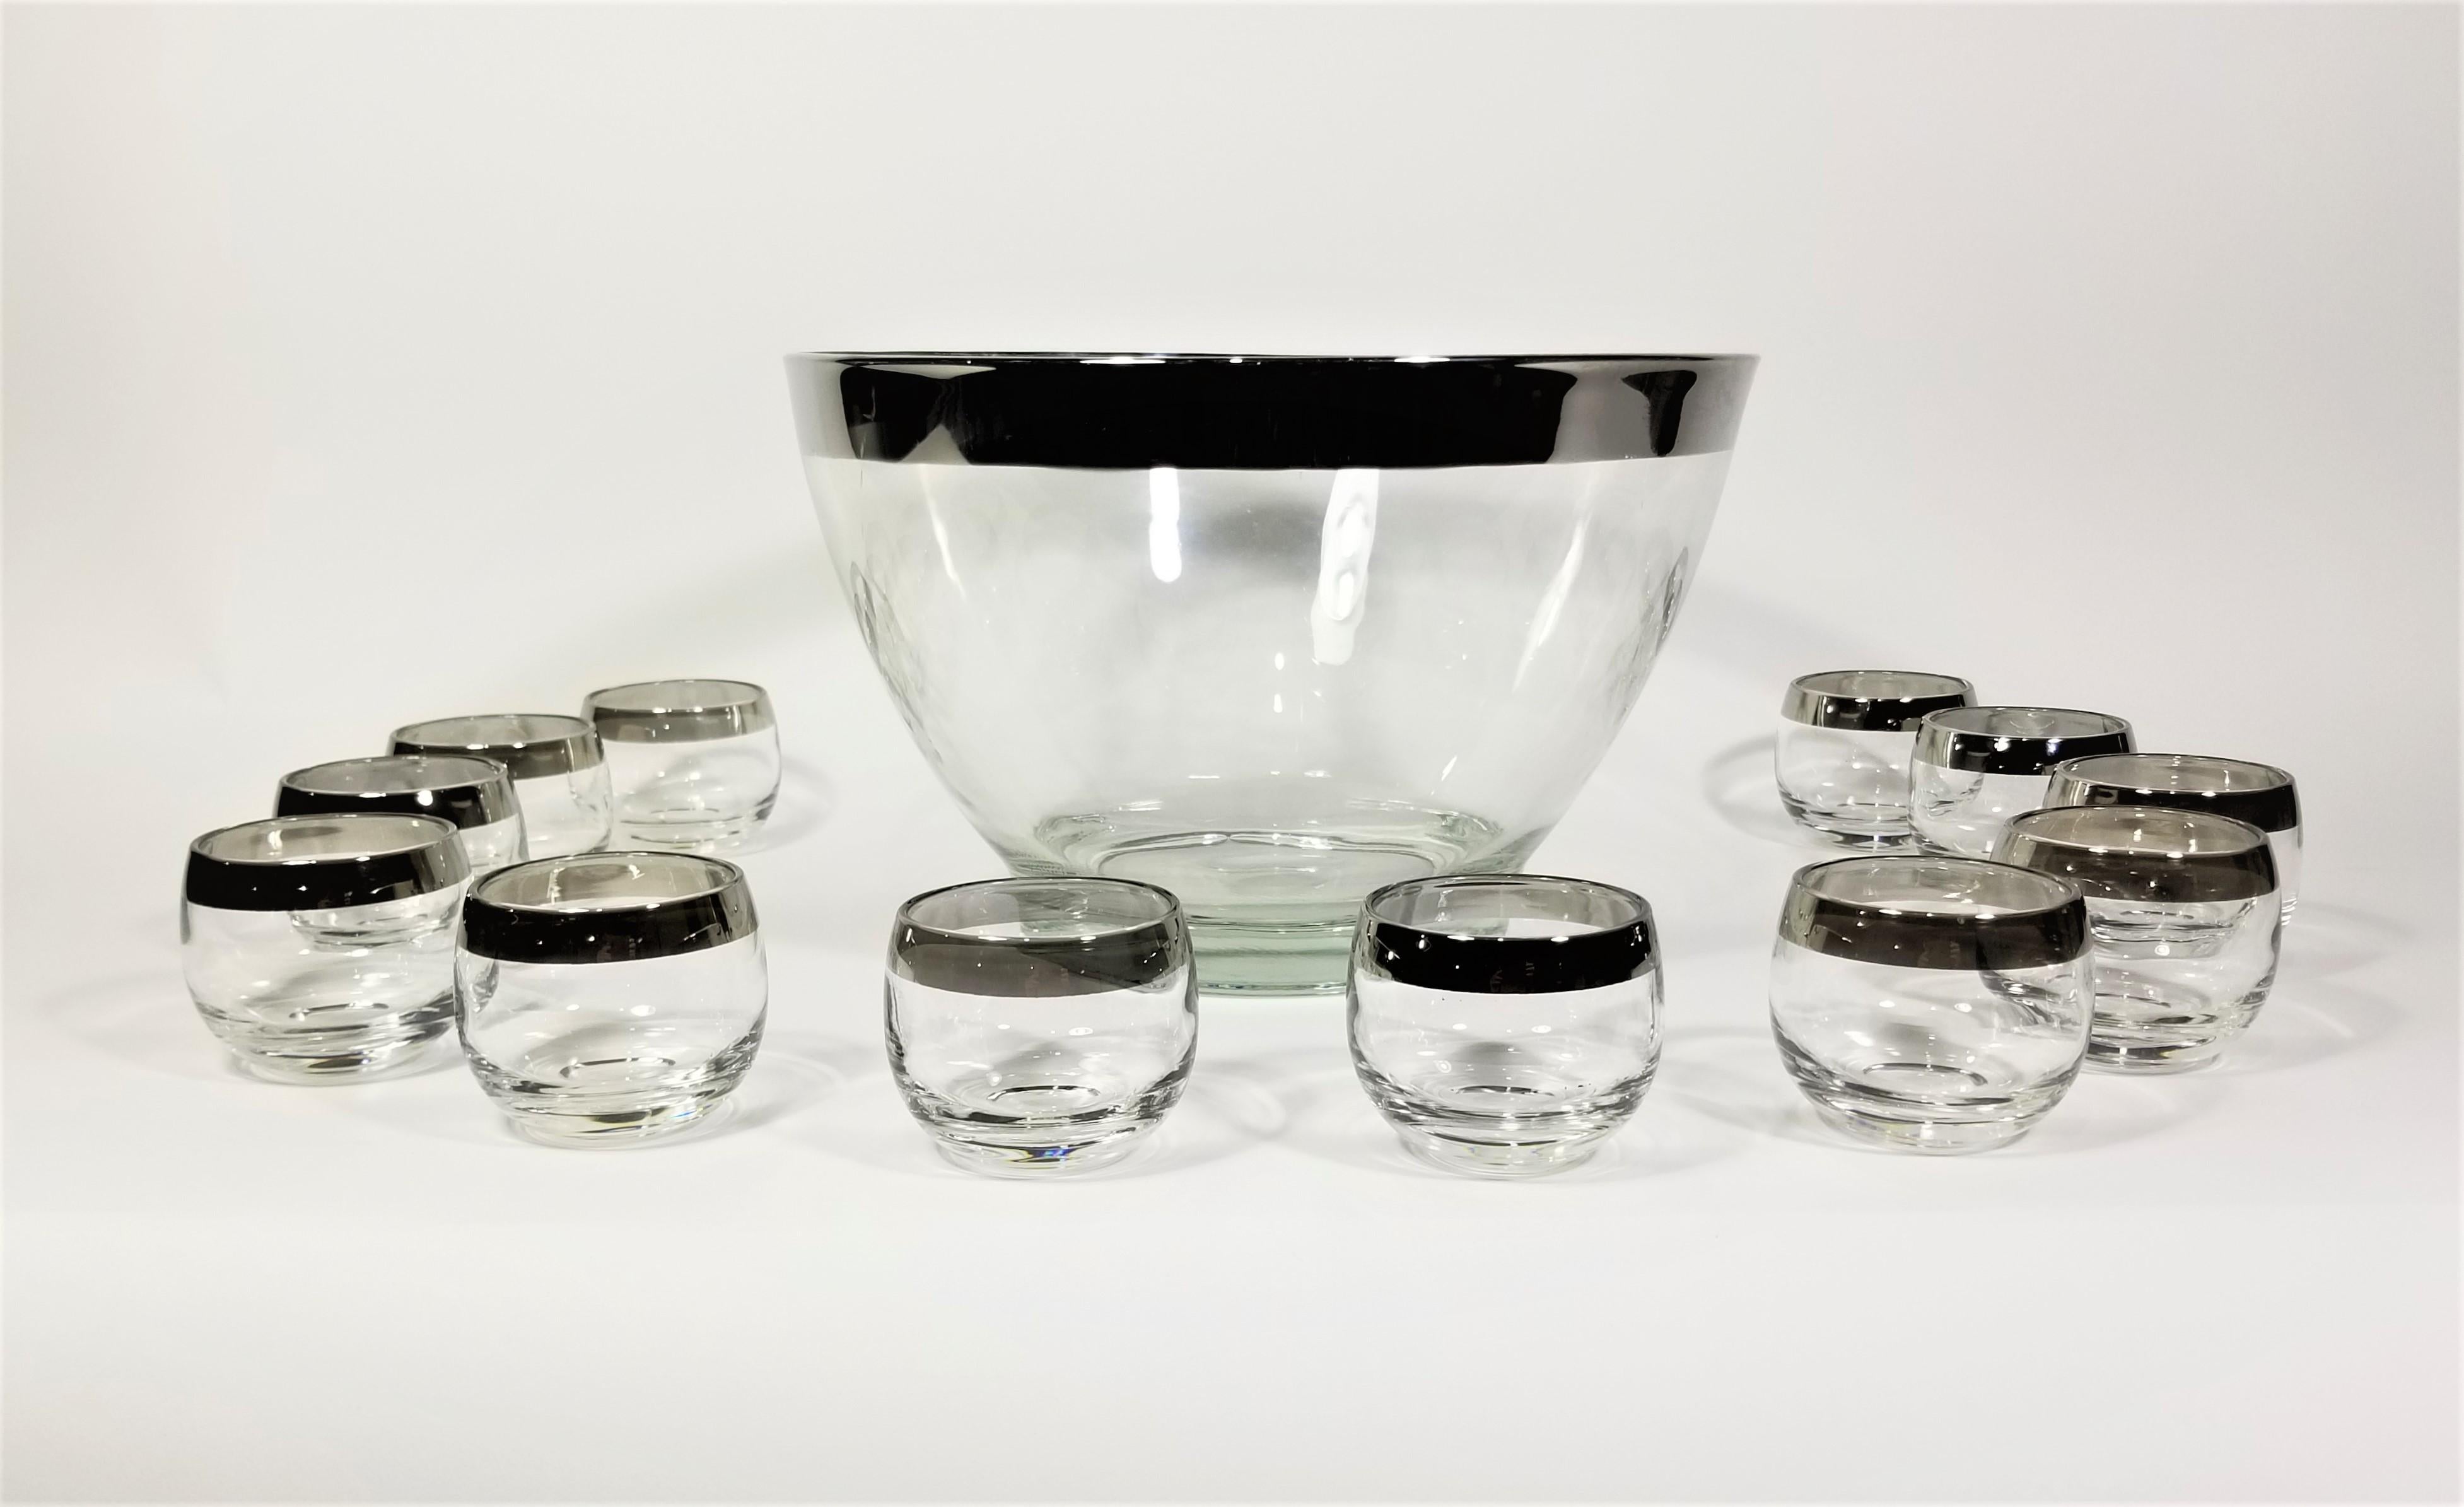 1960s Mid Century Dorothy Thorpe Silver Rimmed Glassware Barware. Punch Bowl with 12 4oz glasses. Glasses are often referred to as Roly Poly glasses due to their round modern shape. 
Entire set is in Excellent Condition. 

Measurements:
Bowl Height: